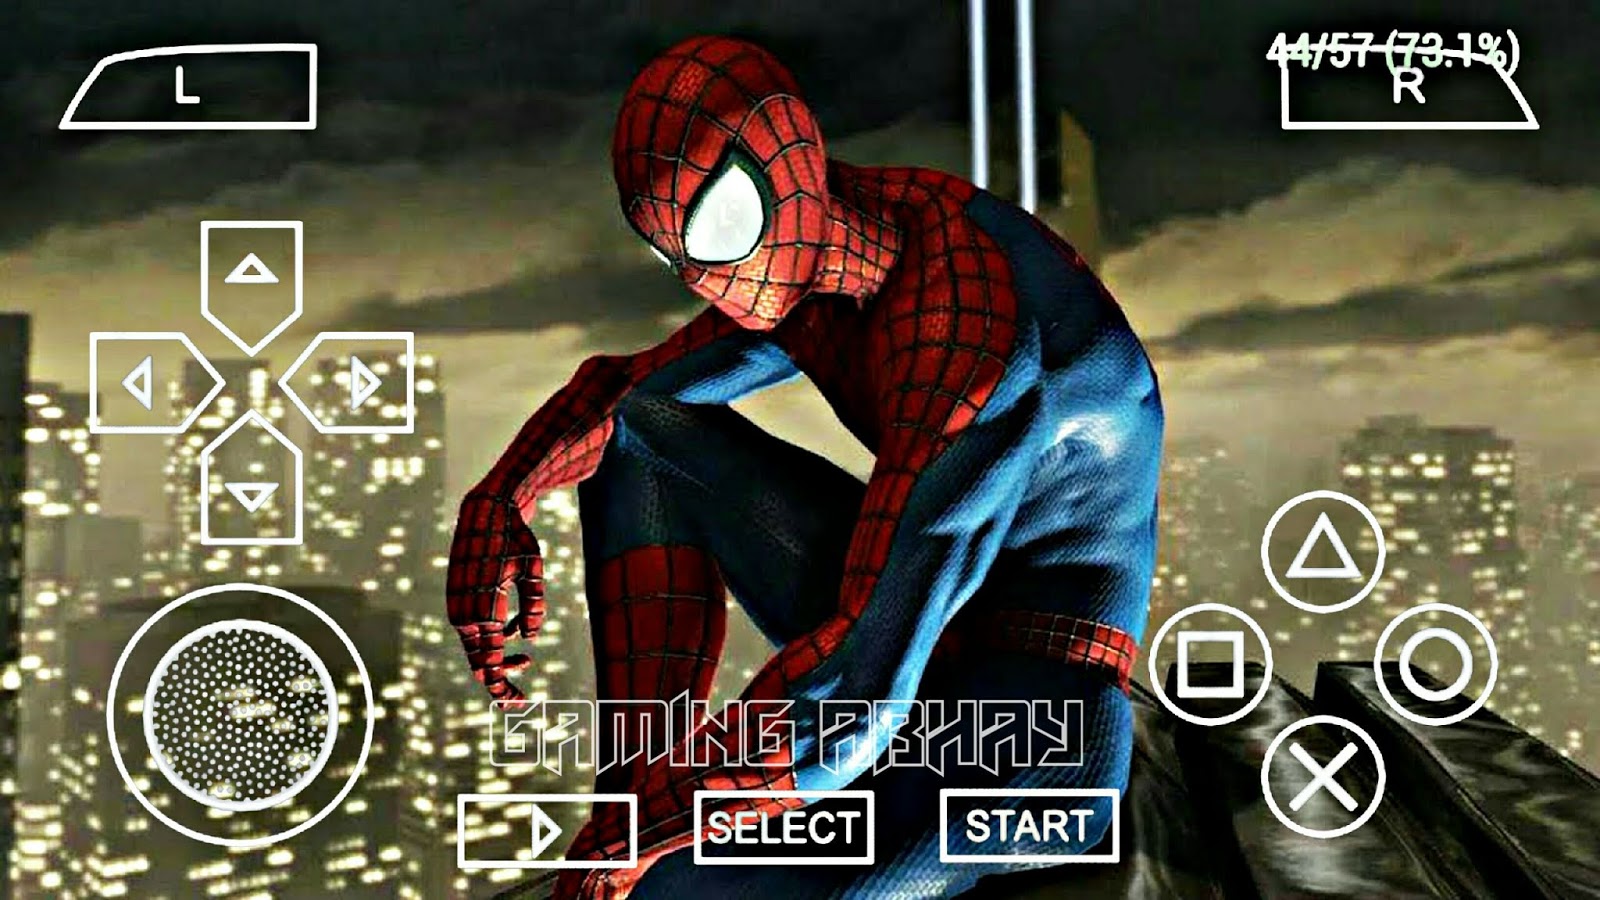 Spiderman Game Download For Ppsspp buddiestree